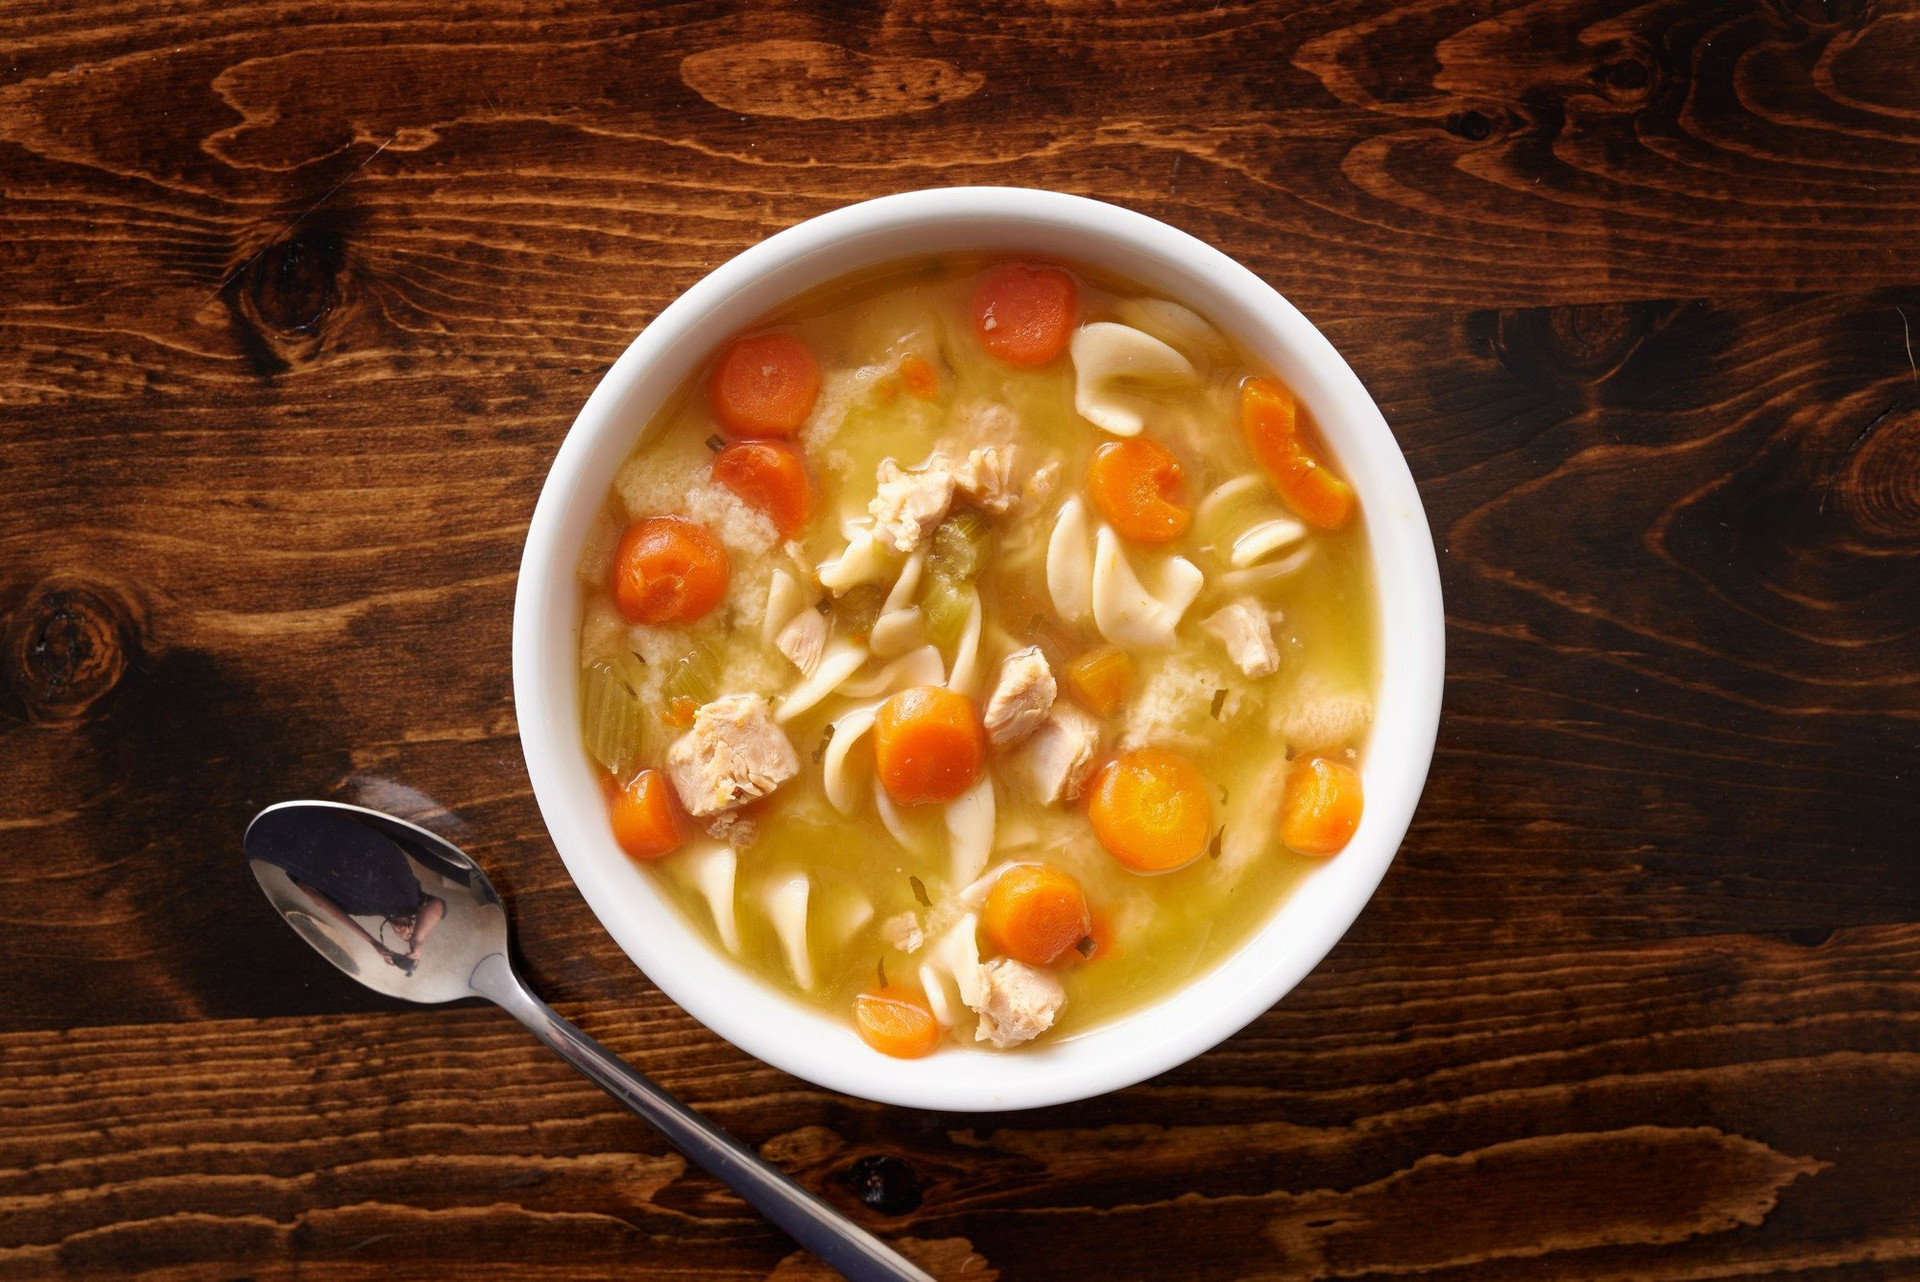 bowl-of-chicken-noodle-soup-shot-top-down-royalty-free-image-485348660-1534446739-17014263132681341840574.jpg